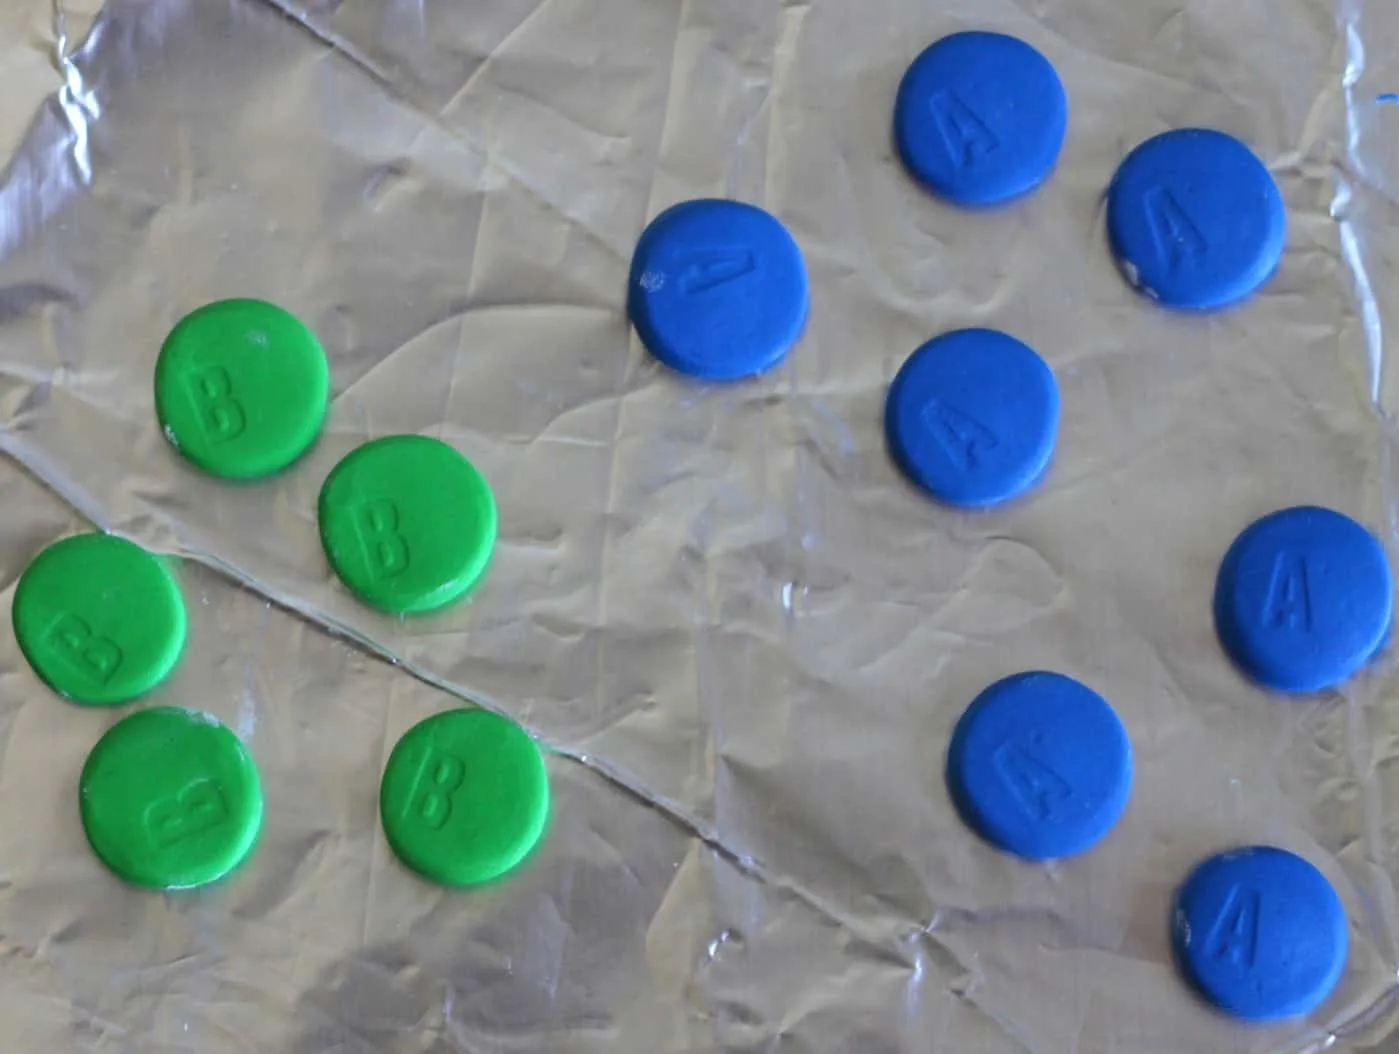 Clay baked to look like Nintendo 64 controller buttons